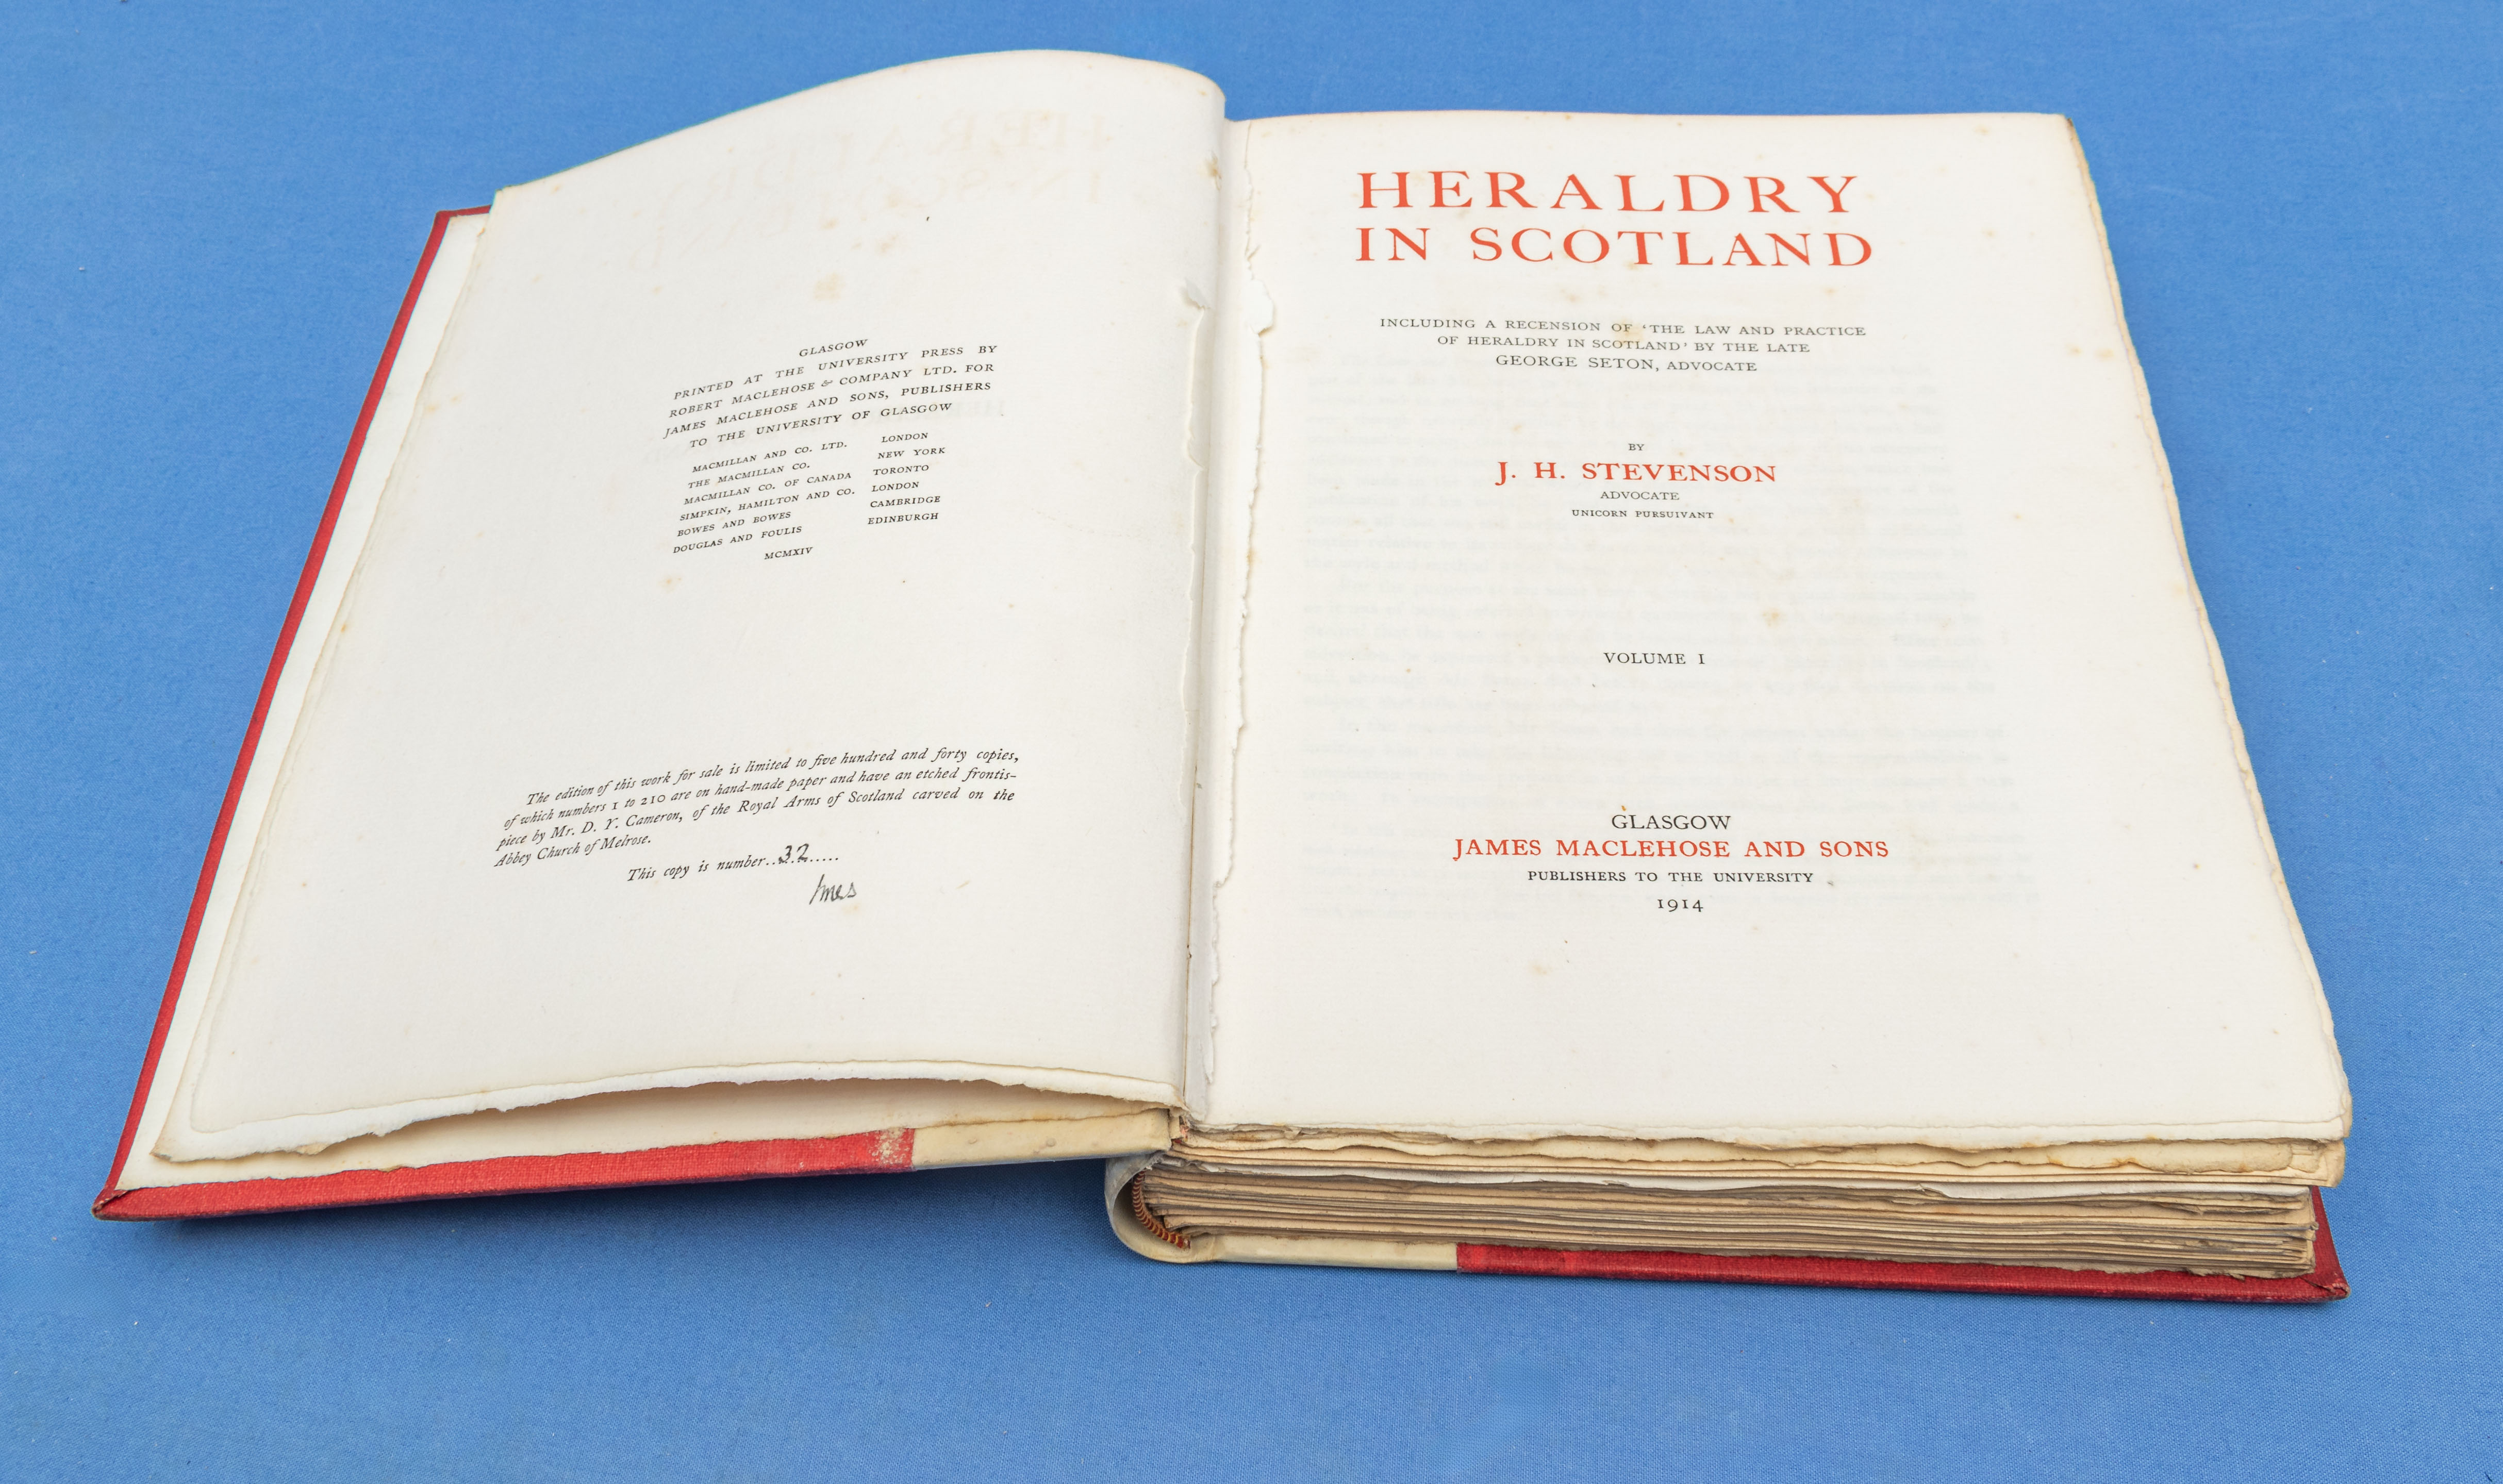 Heraldry in Scotland volumes I and II by J H Stevenson published by James Maclehose and Sons Glasgow - Image 4 of 11